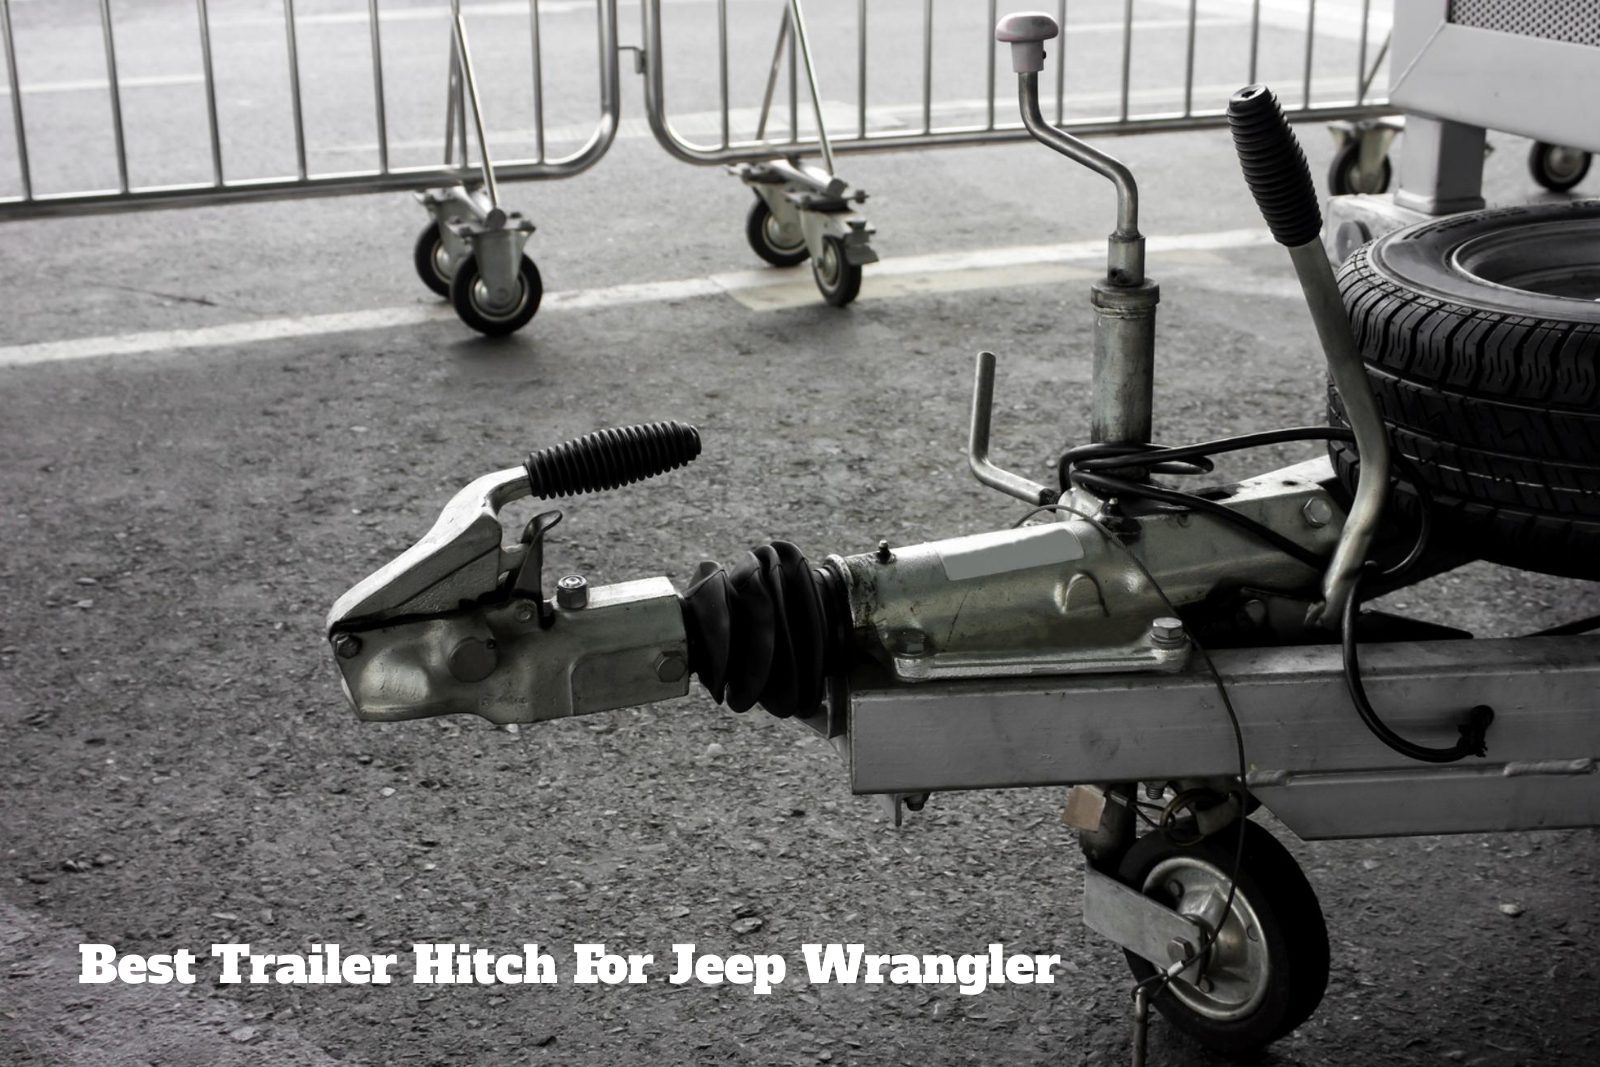 Best Trailer Hitch For Jeep Wrangler